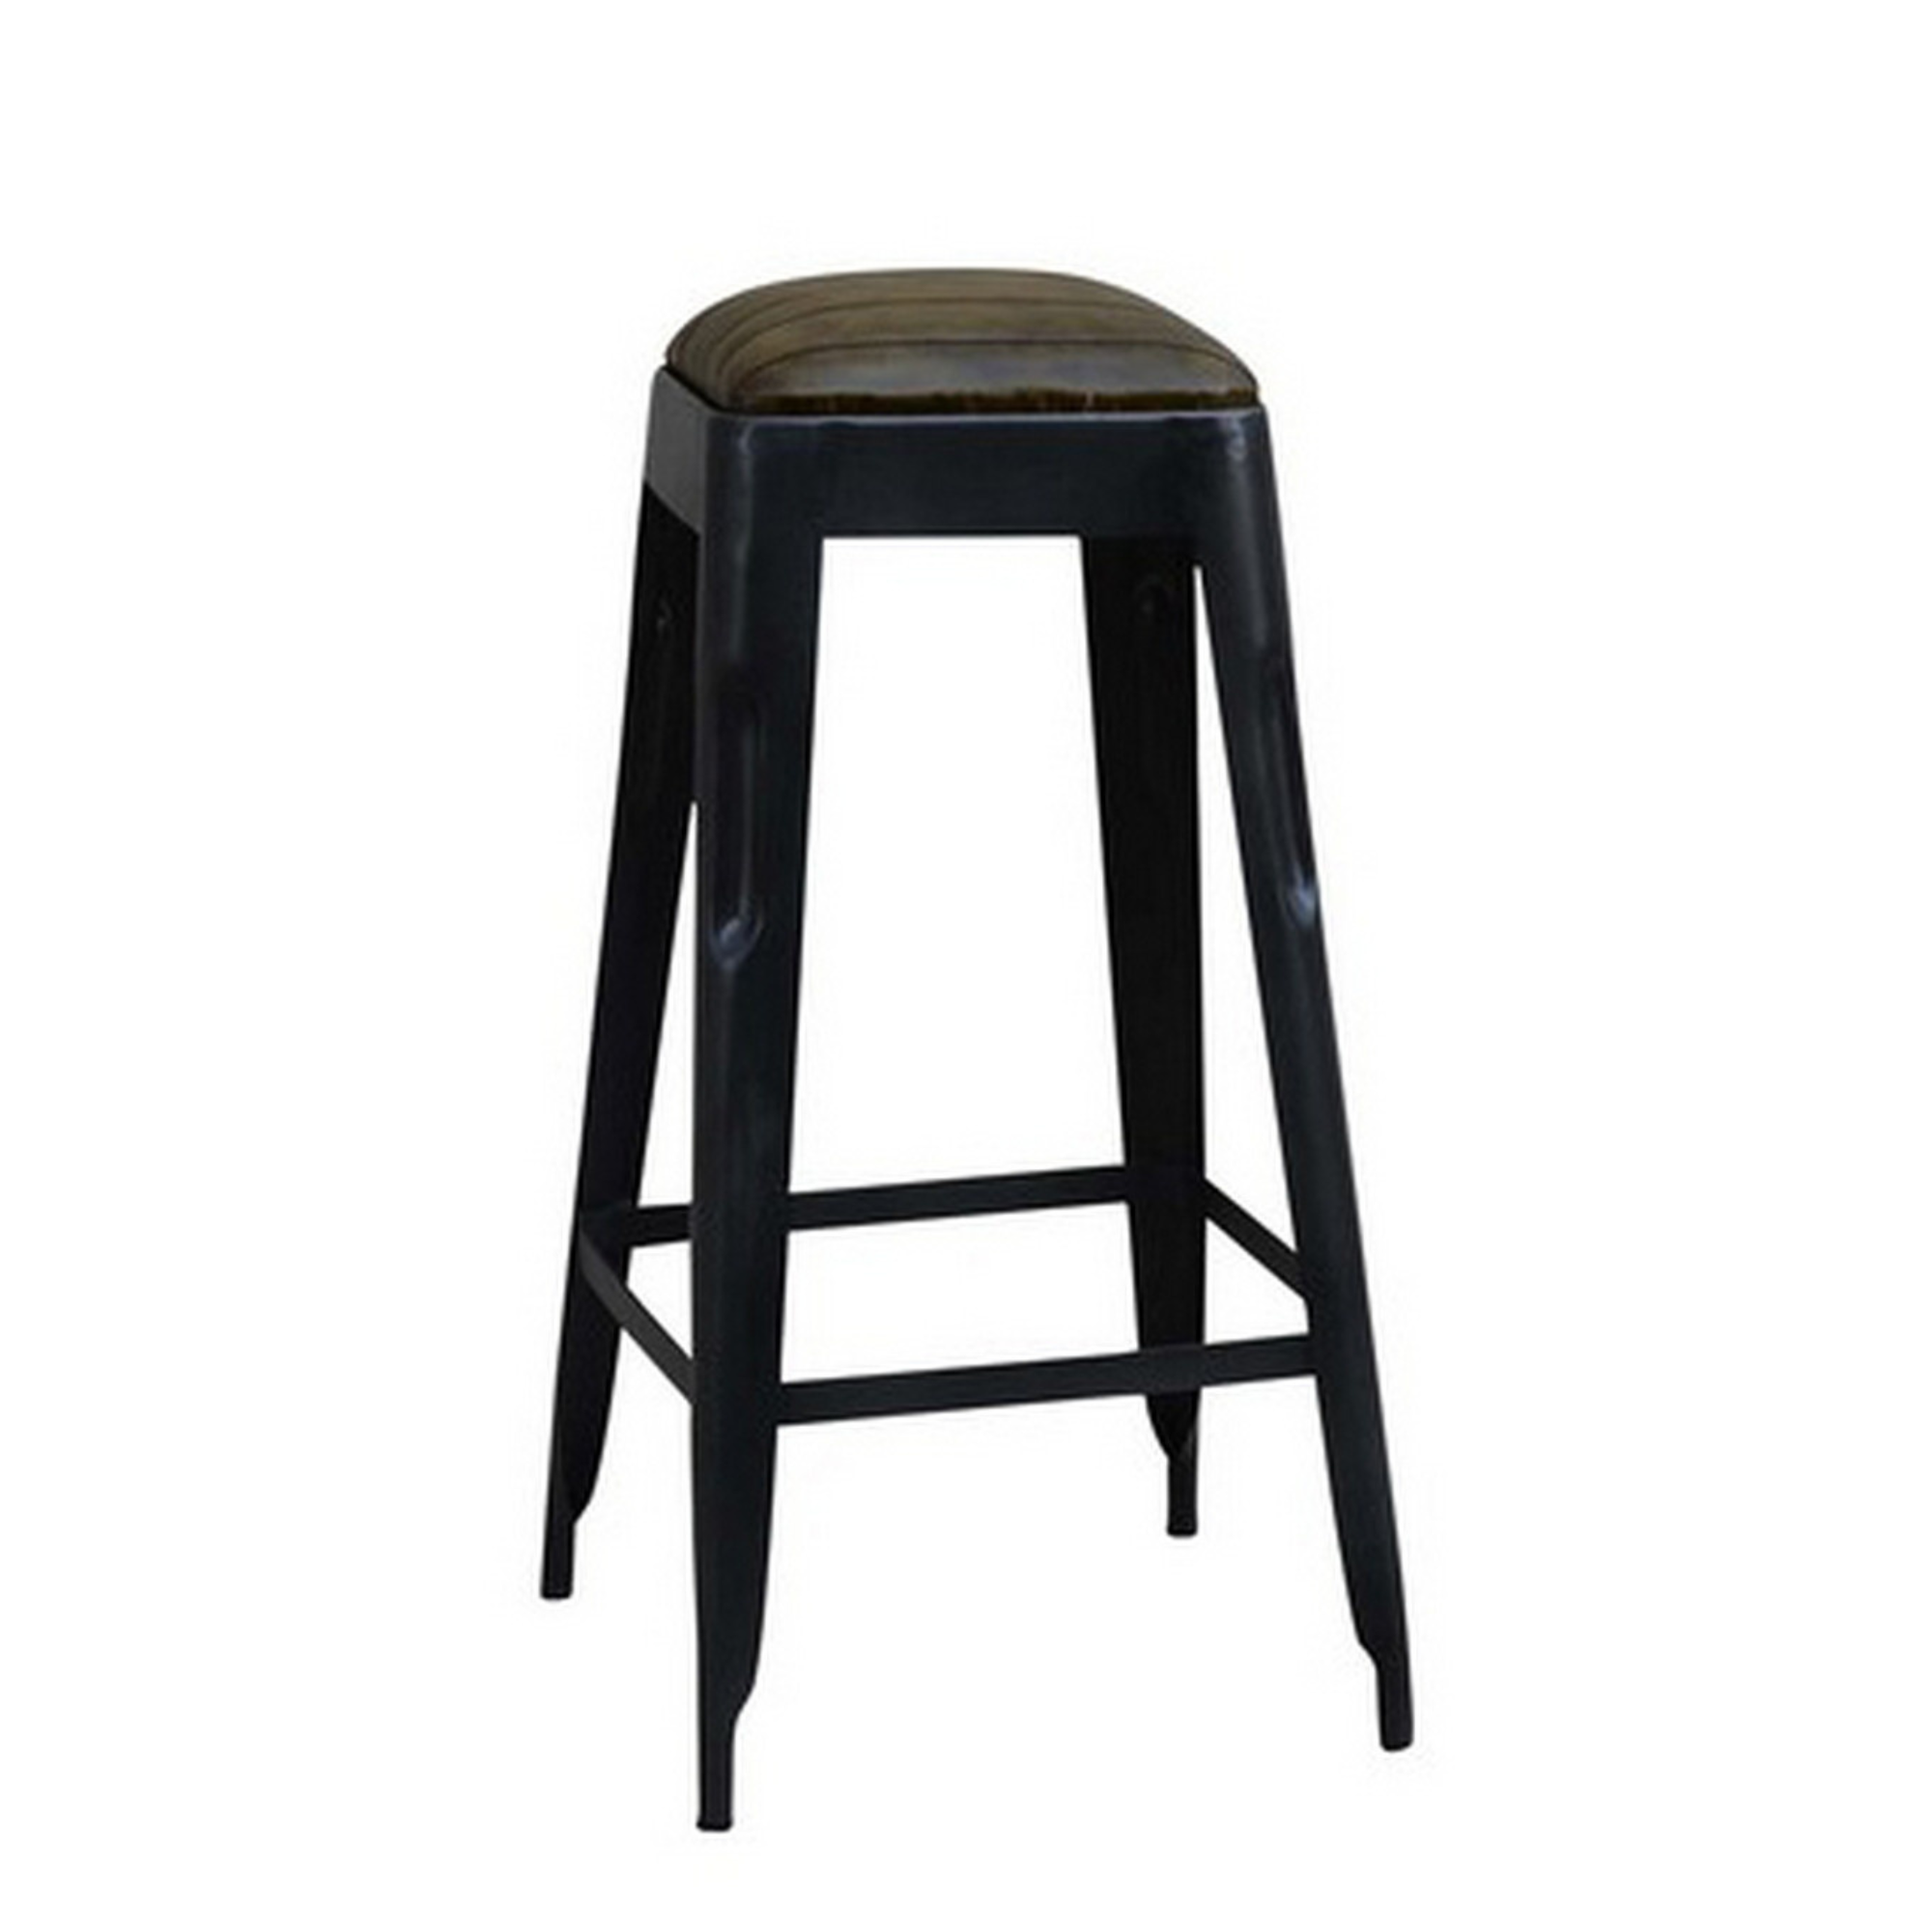 INDUSTRIAL LEATHER TOP BAR STOOL